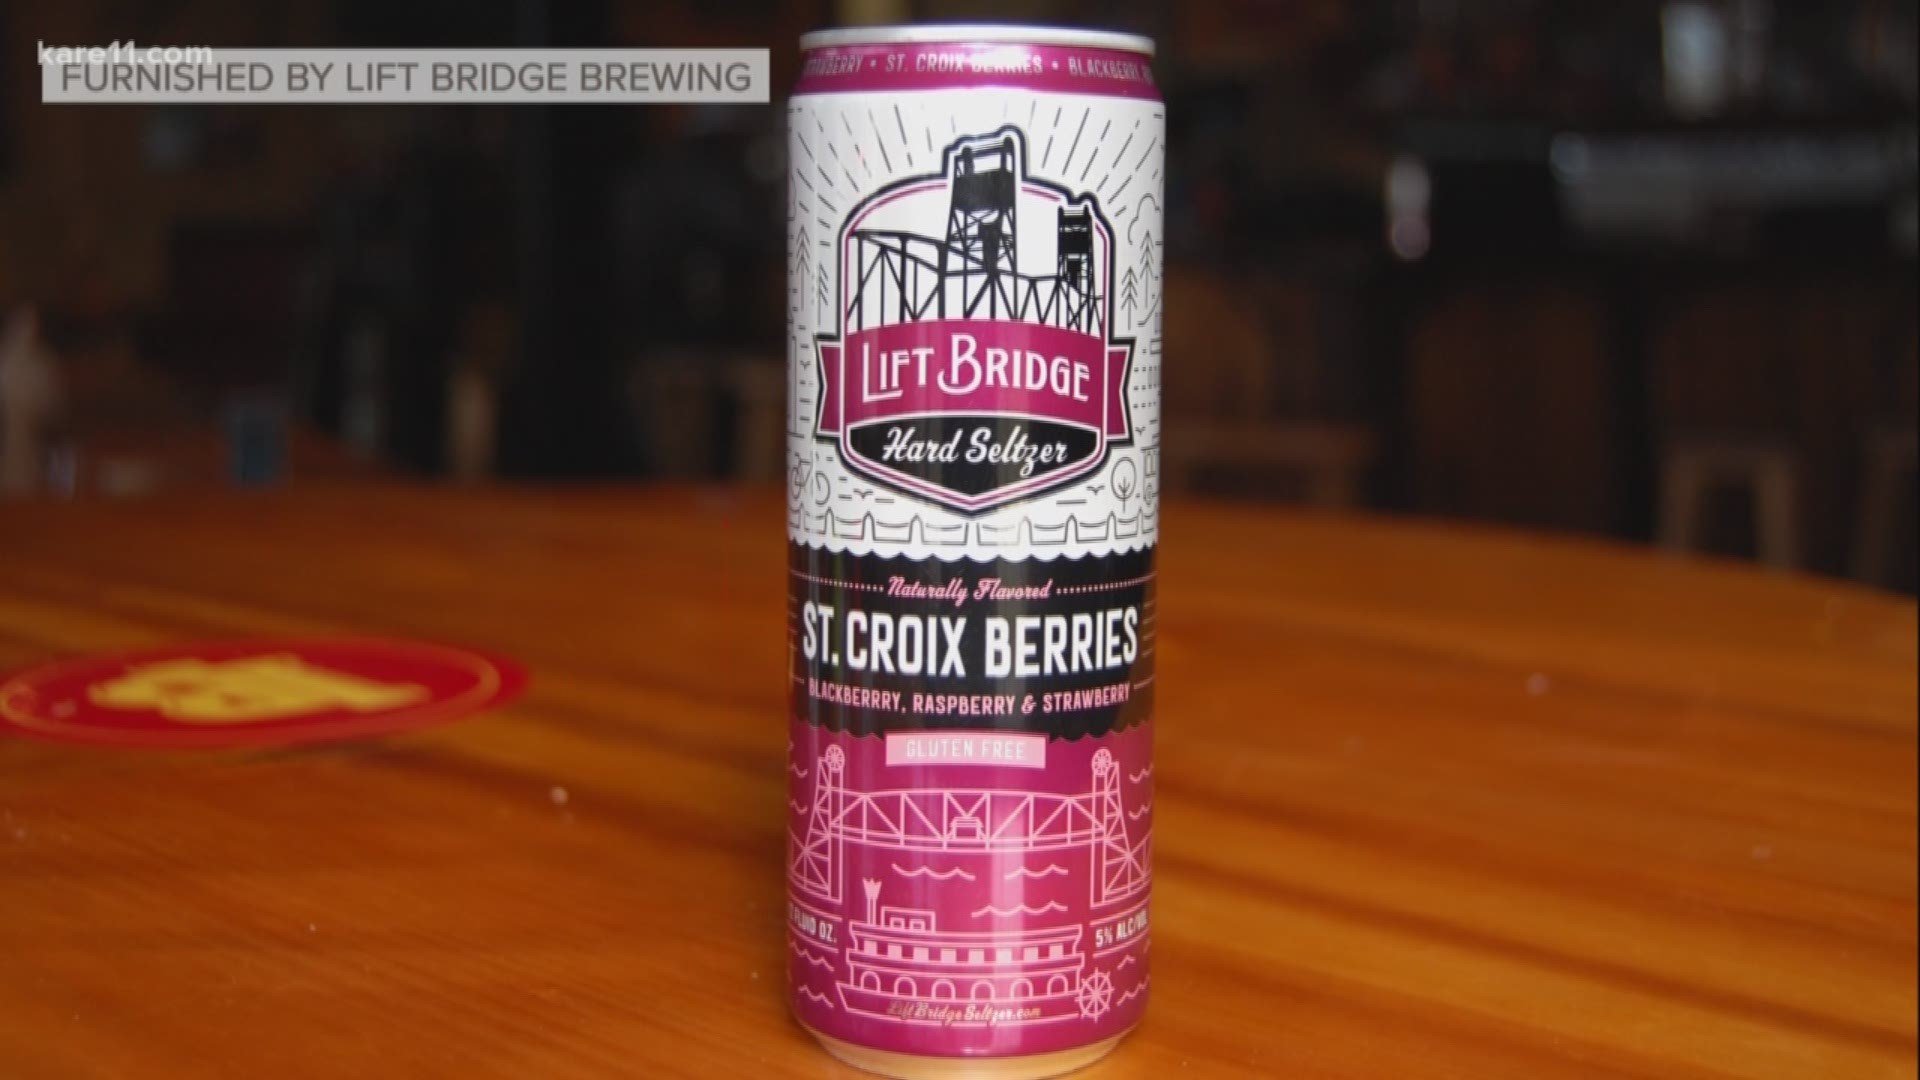 Lift Bridge Brewery shares some cocktail recipes using their line of hard seltzer products.